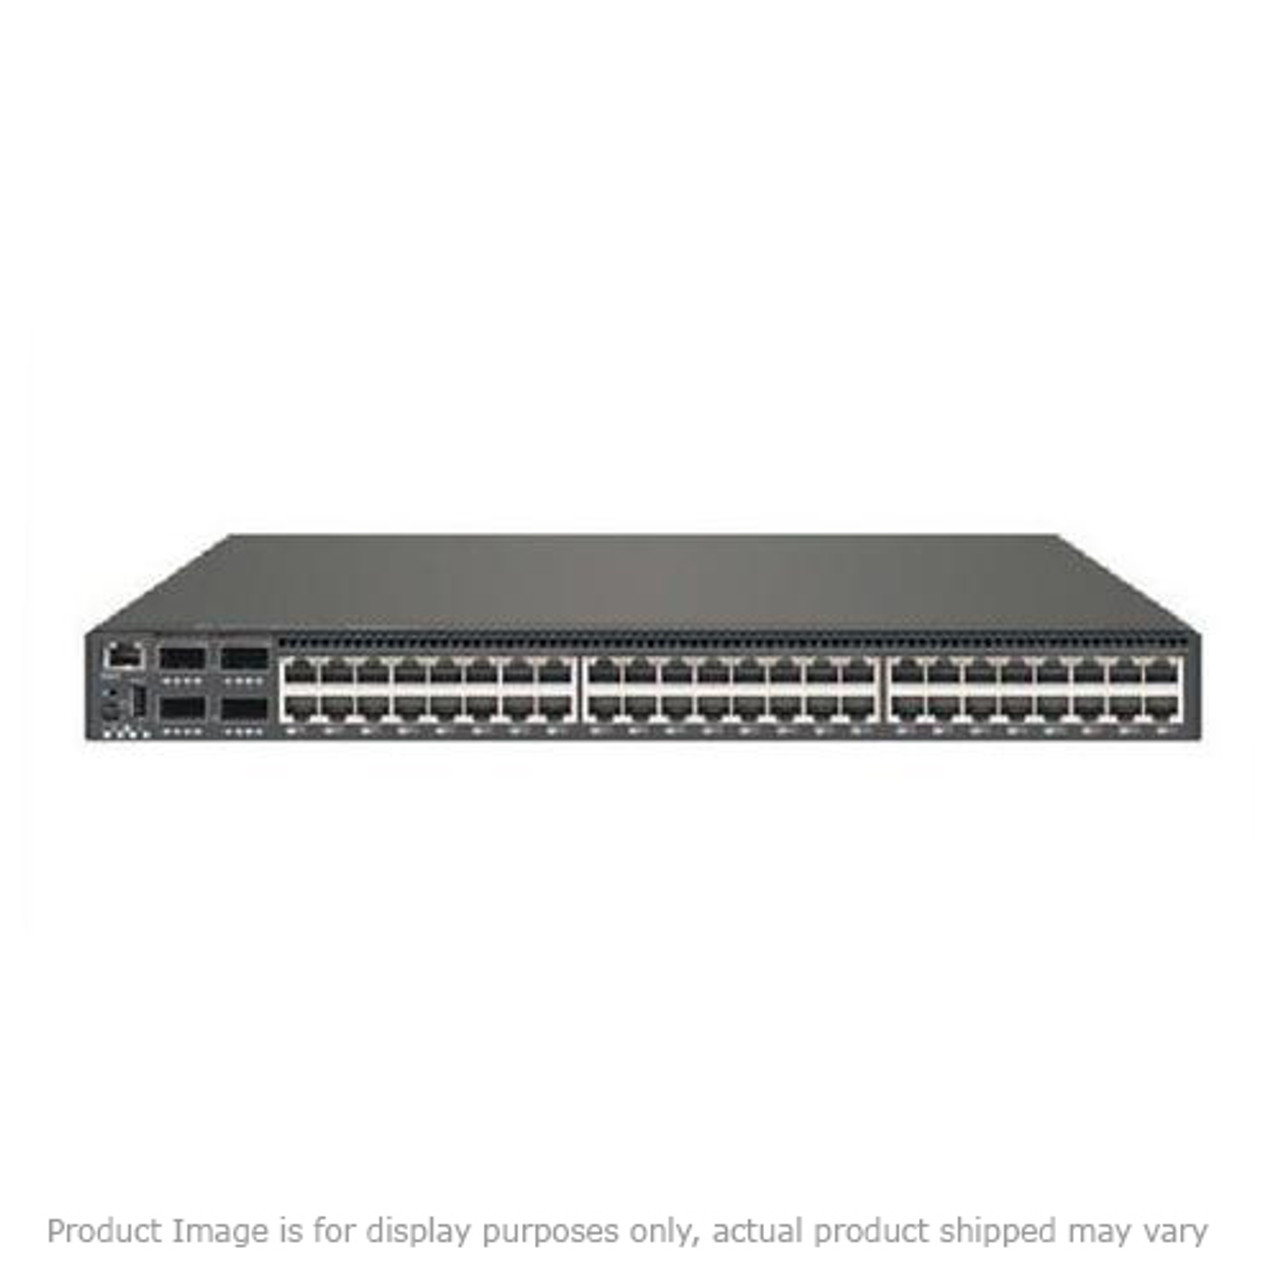 0231A930 3Com 48-Ports Module with PoE 48 x 10/100/1000Base-T LAN Expansion Module (Refurbished)